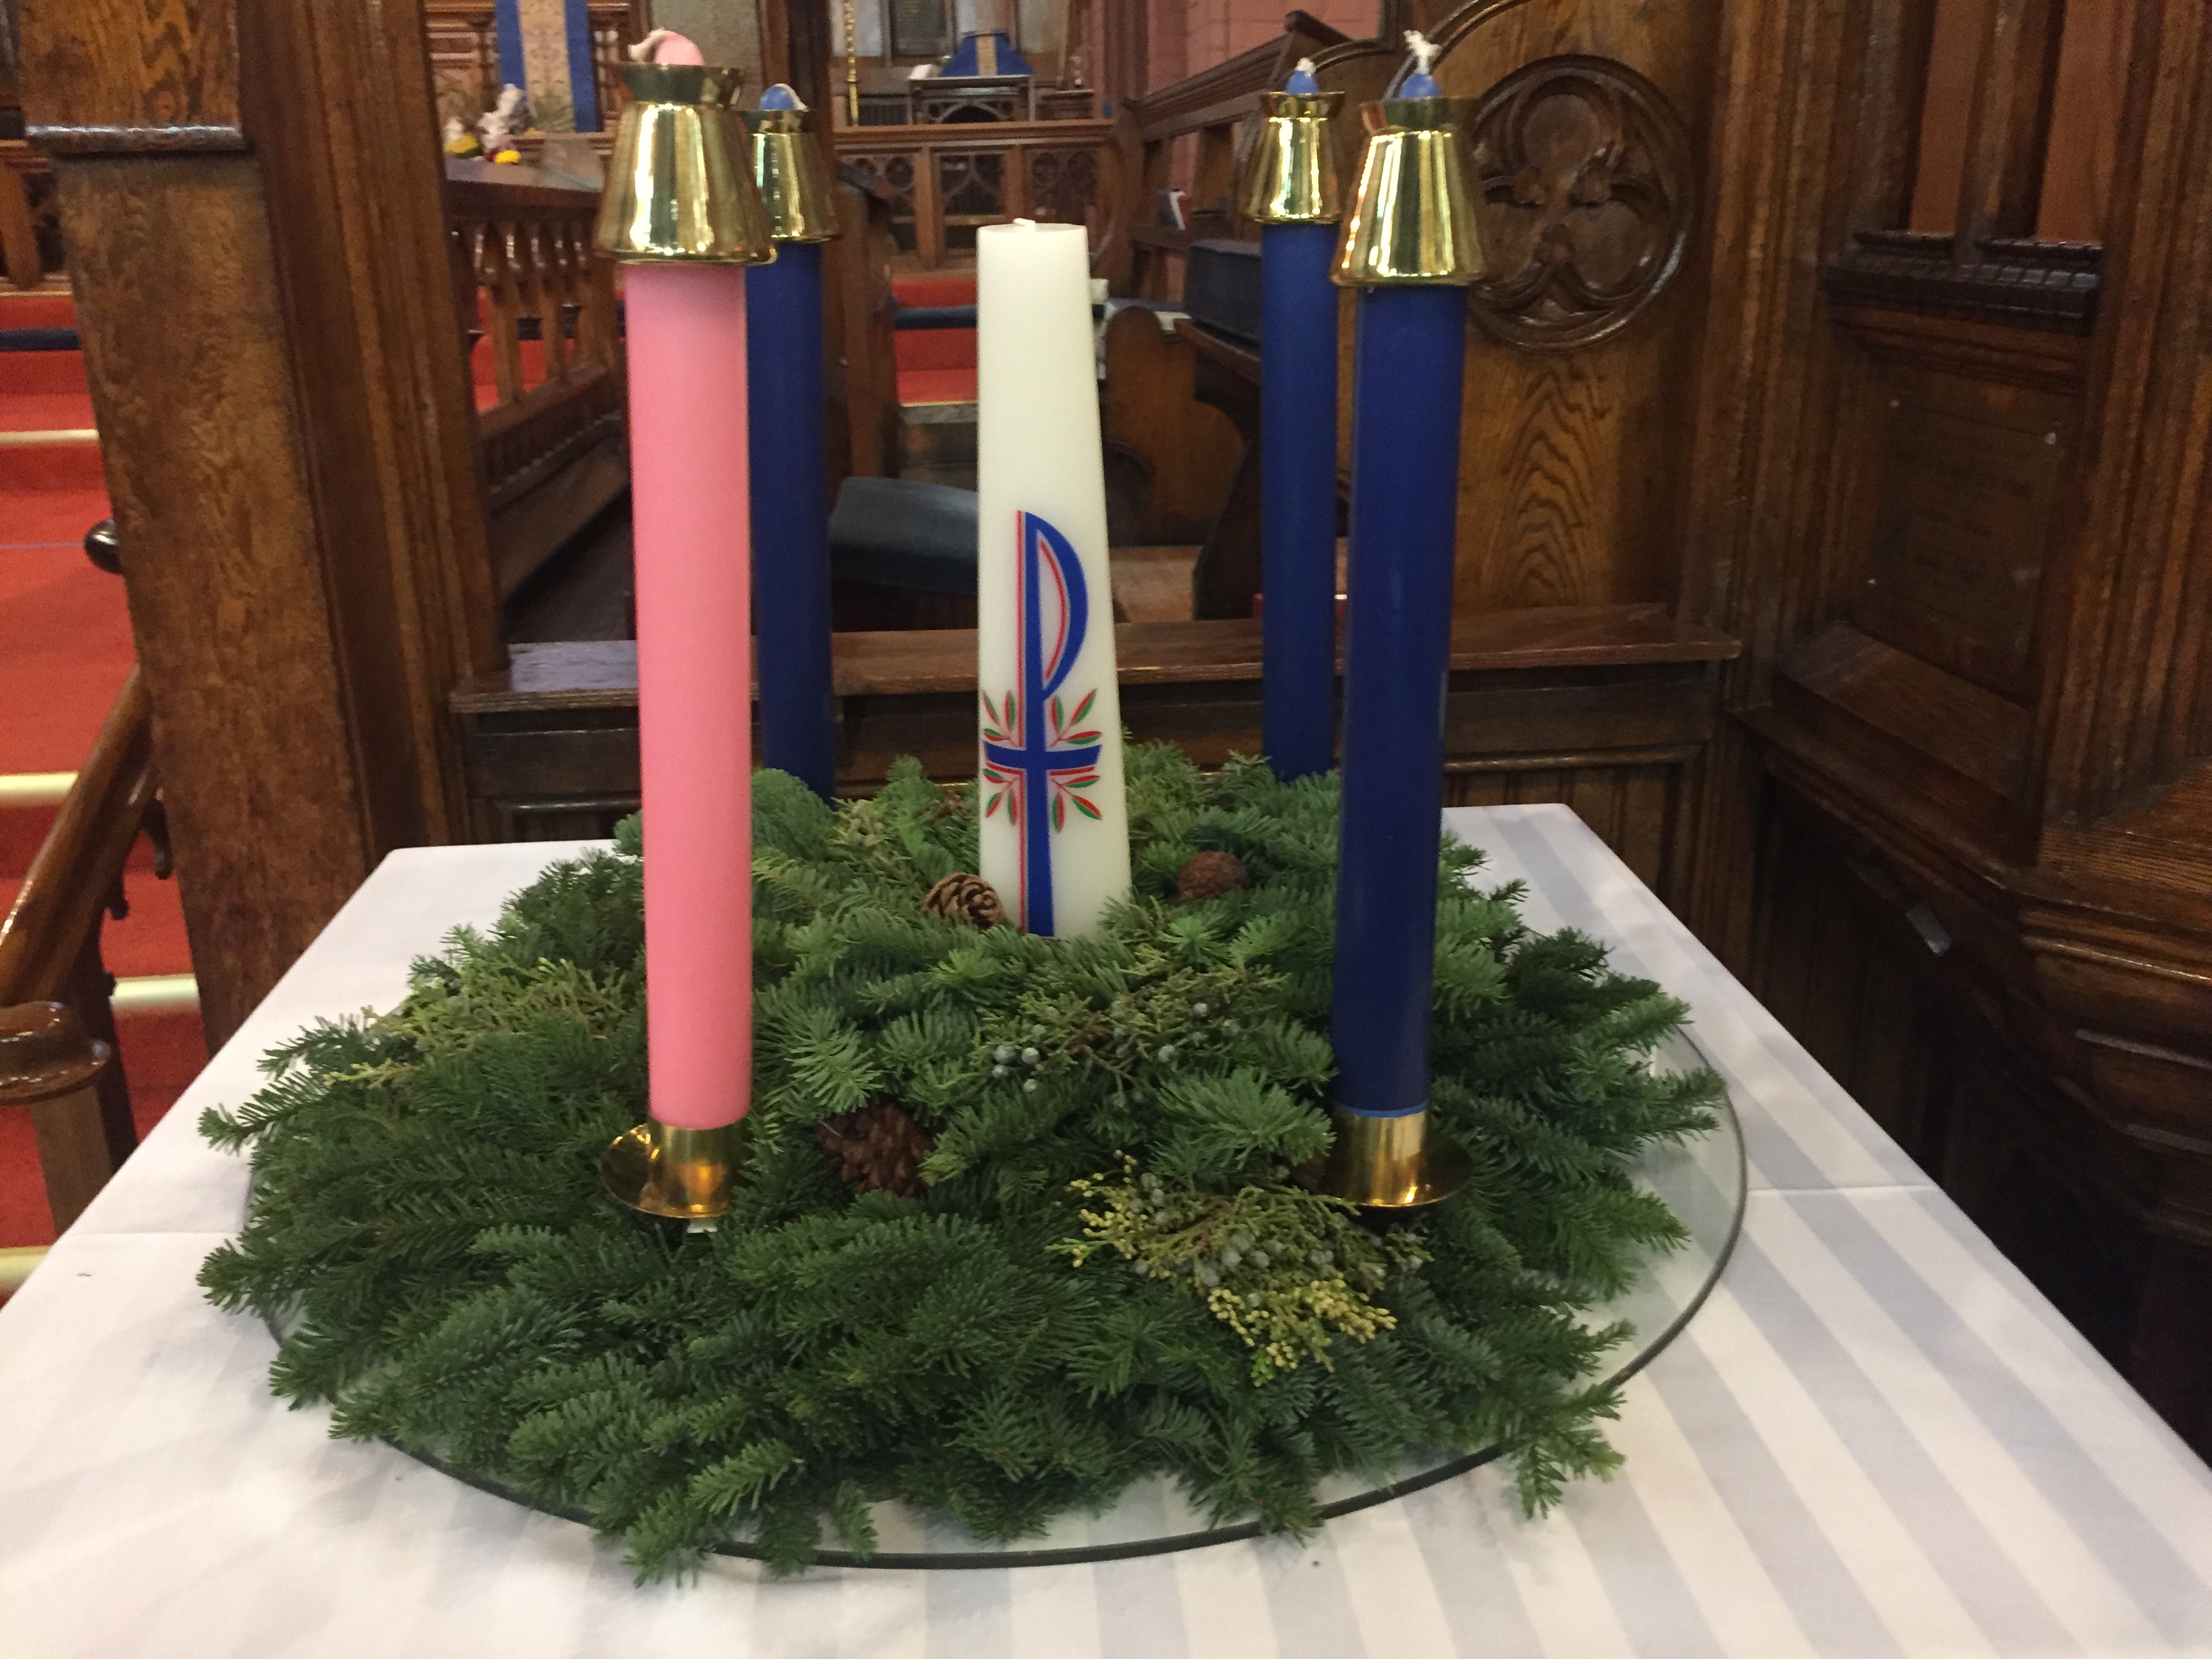 December 13th Service – The Third Sunday of Advent